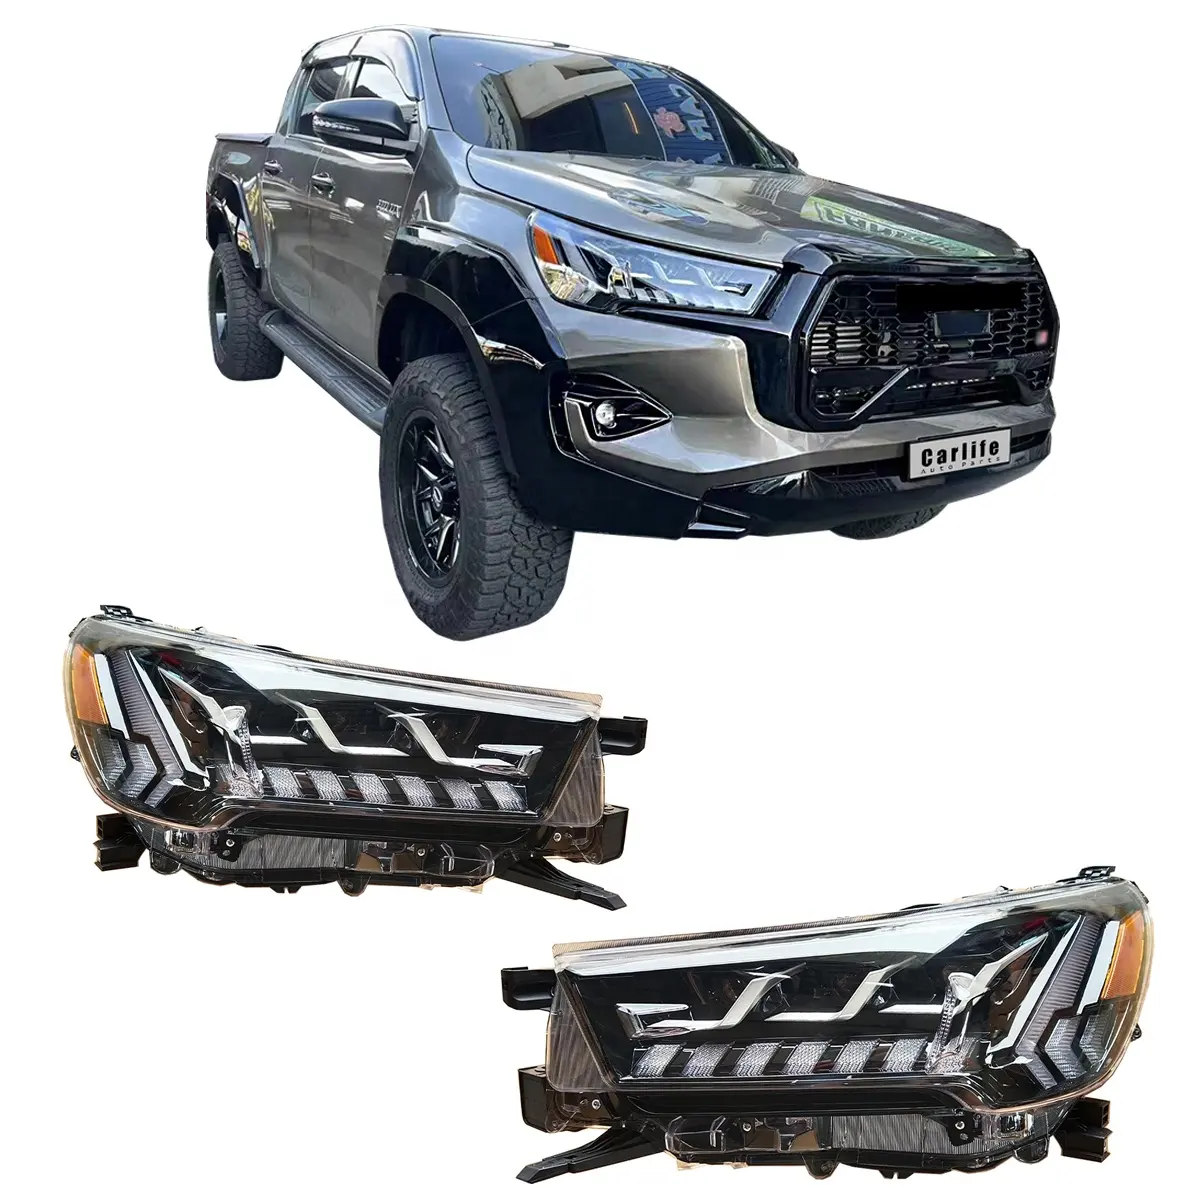 CARLIFE AUTO ACCESSORIES 4X4 PICKUP TRUCK TUNING LED HEAD LAMP LIGHT LIGHTS FOR TOYOTA HILUX REVO 2016+